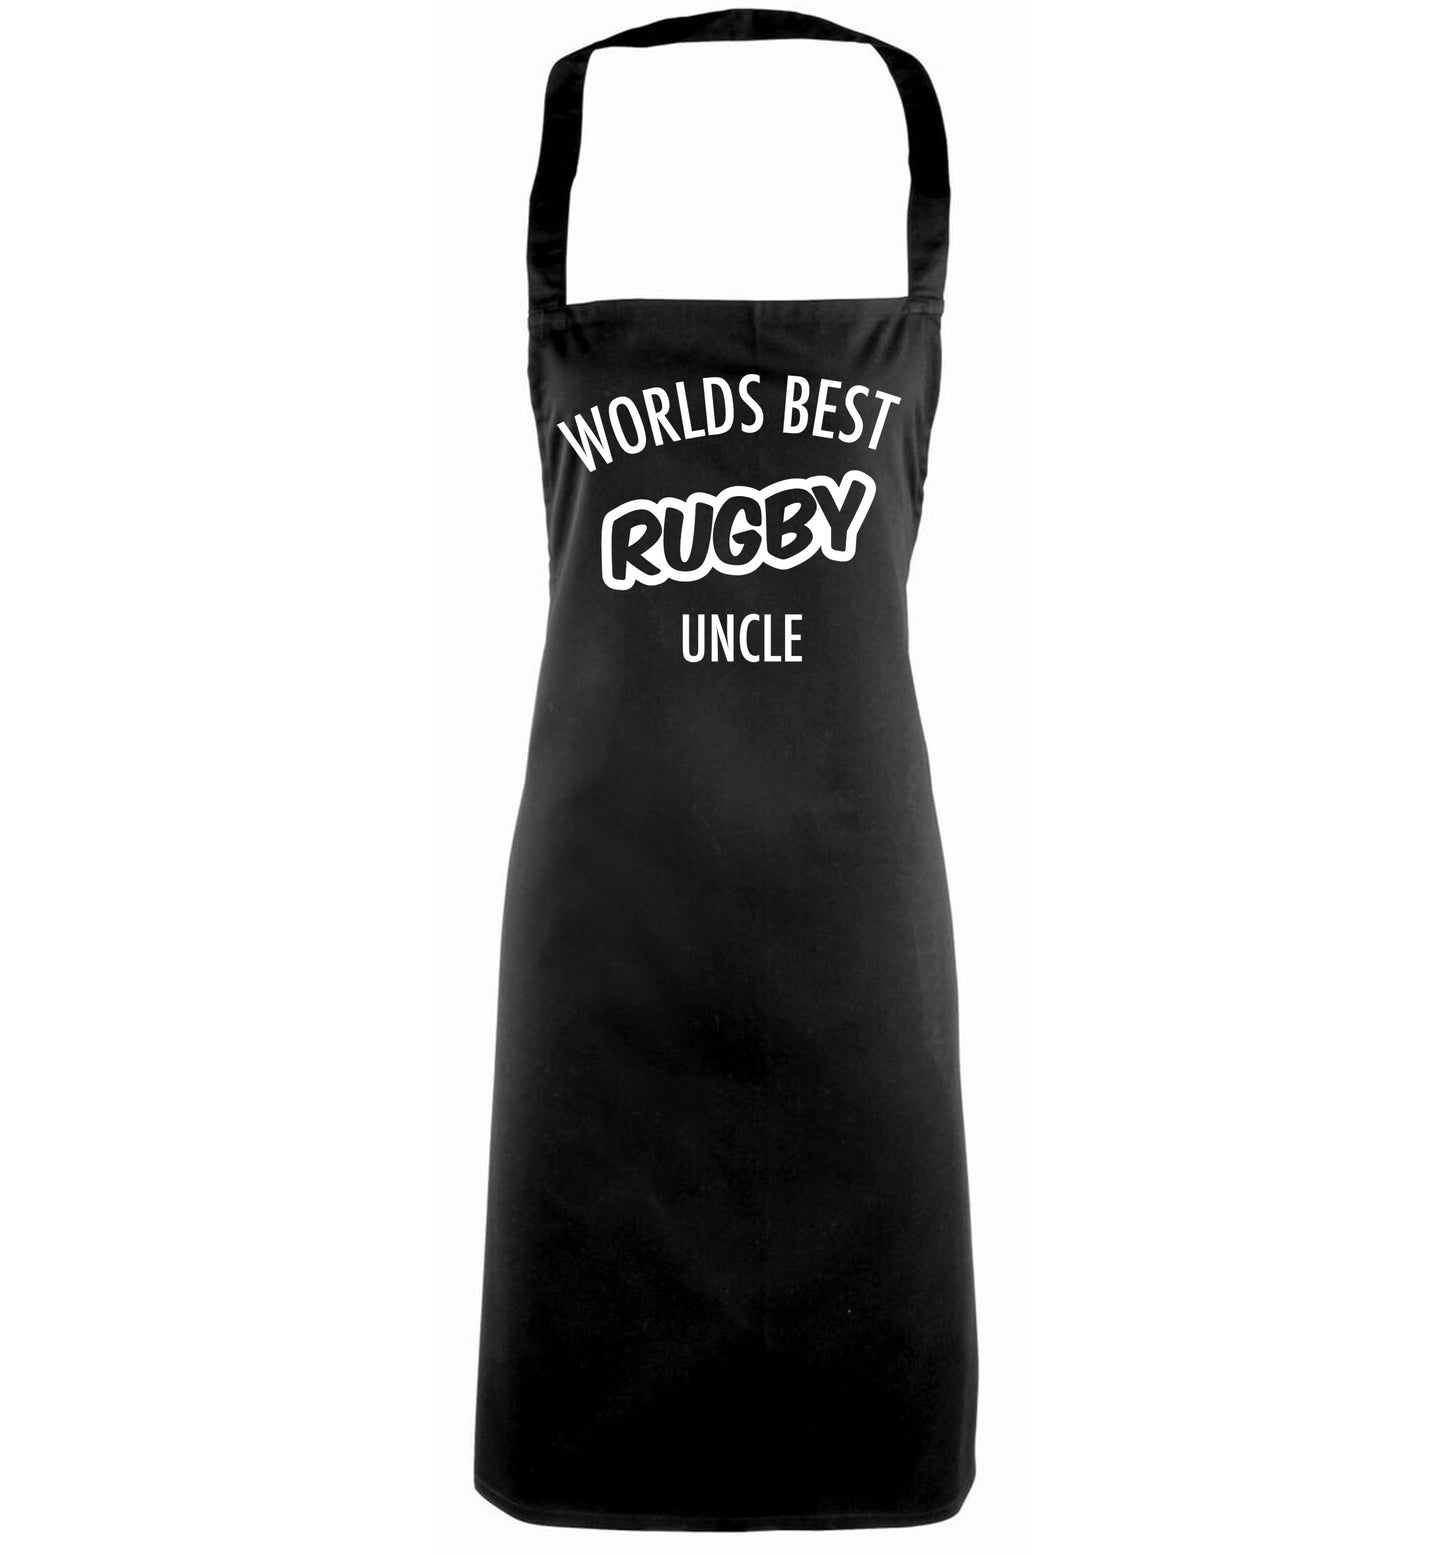 Worlds best rugby uncle black apron